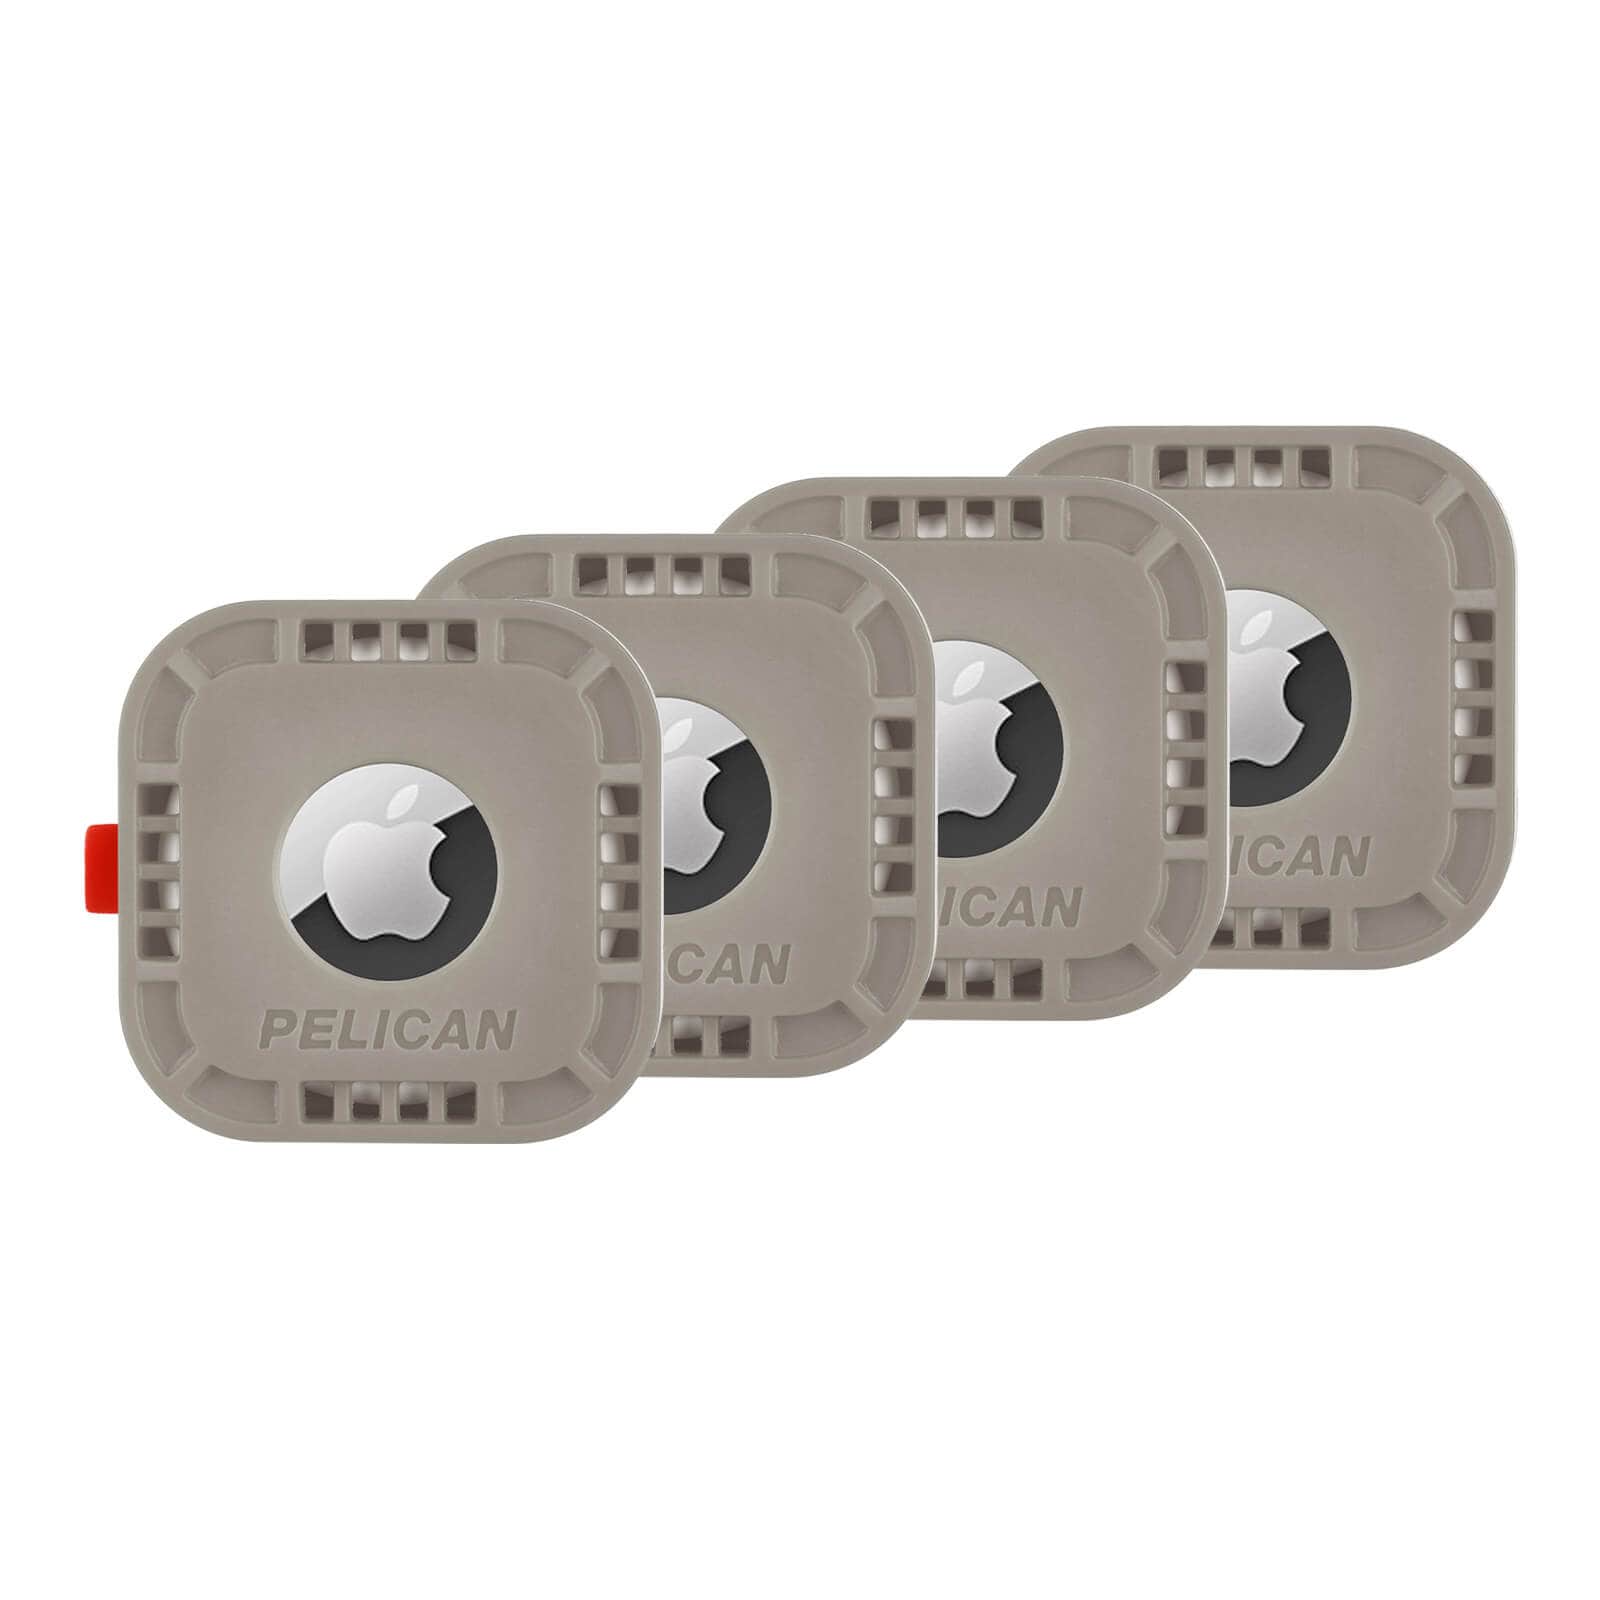 Pelican Protector AirTag Sticker Mount 4 Pack (Grey) - AirTag Case